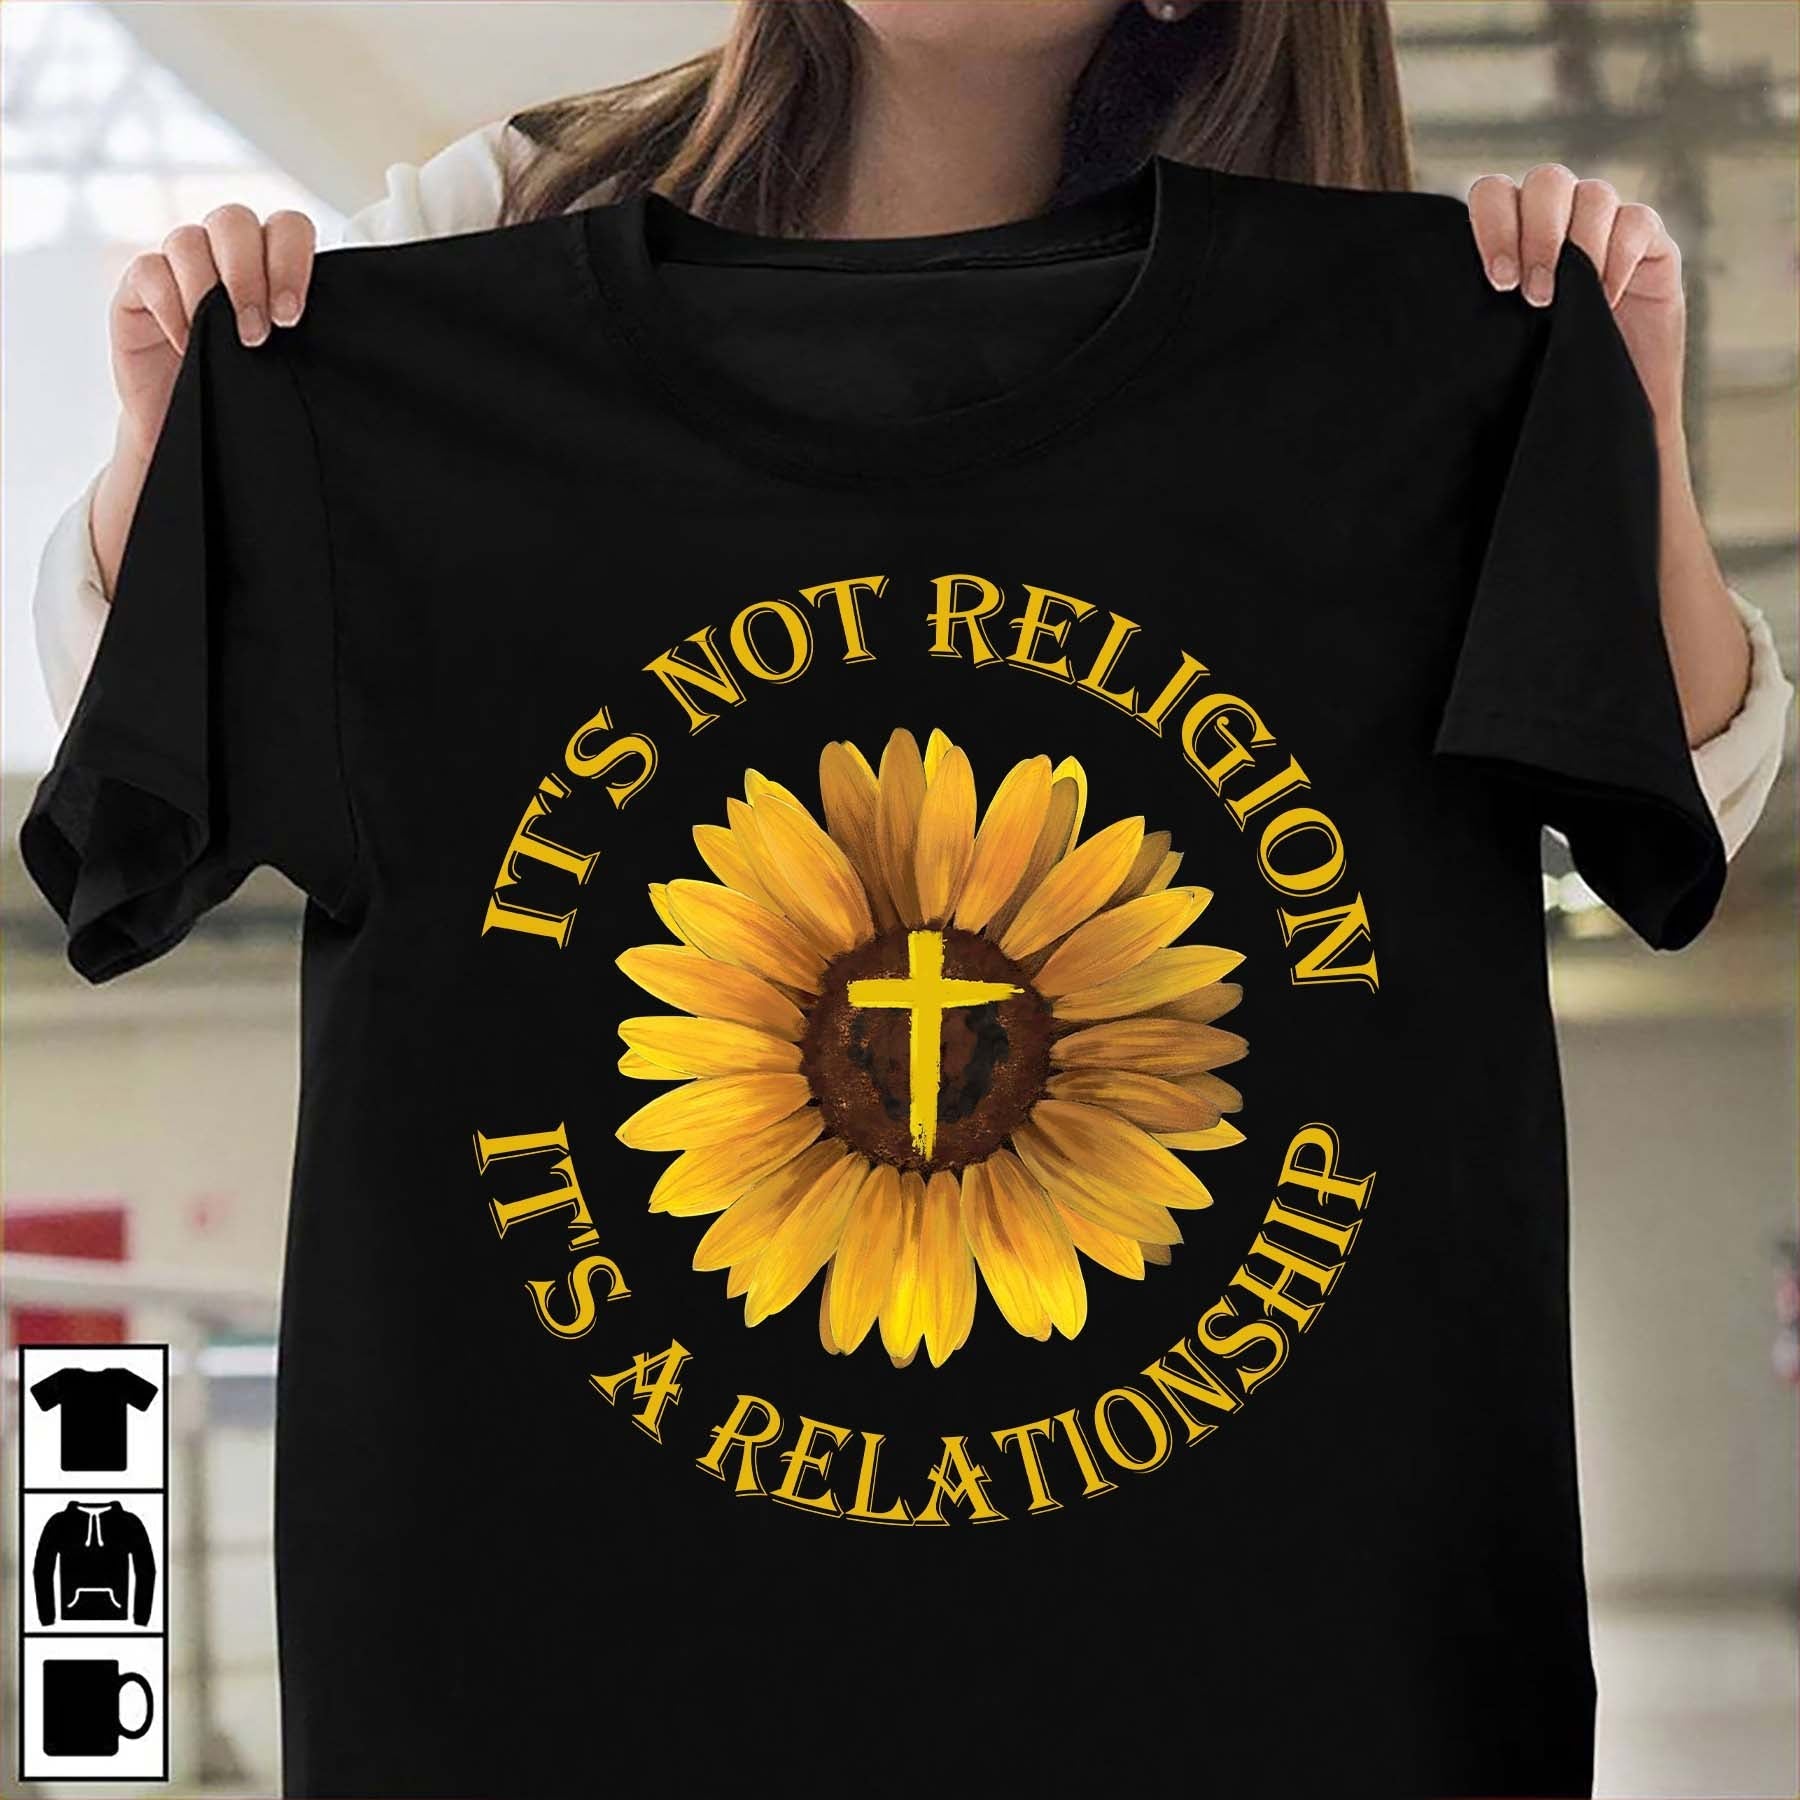 Sunflower painting, Yellow cross symbol, It’s not religion, it’s a relationship – Jesus T Shirt